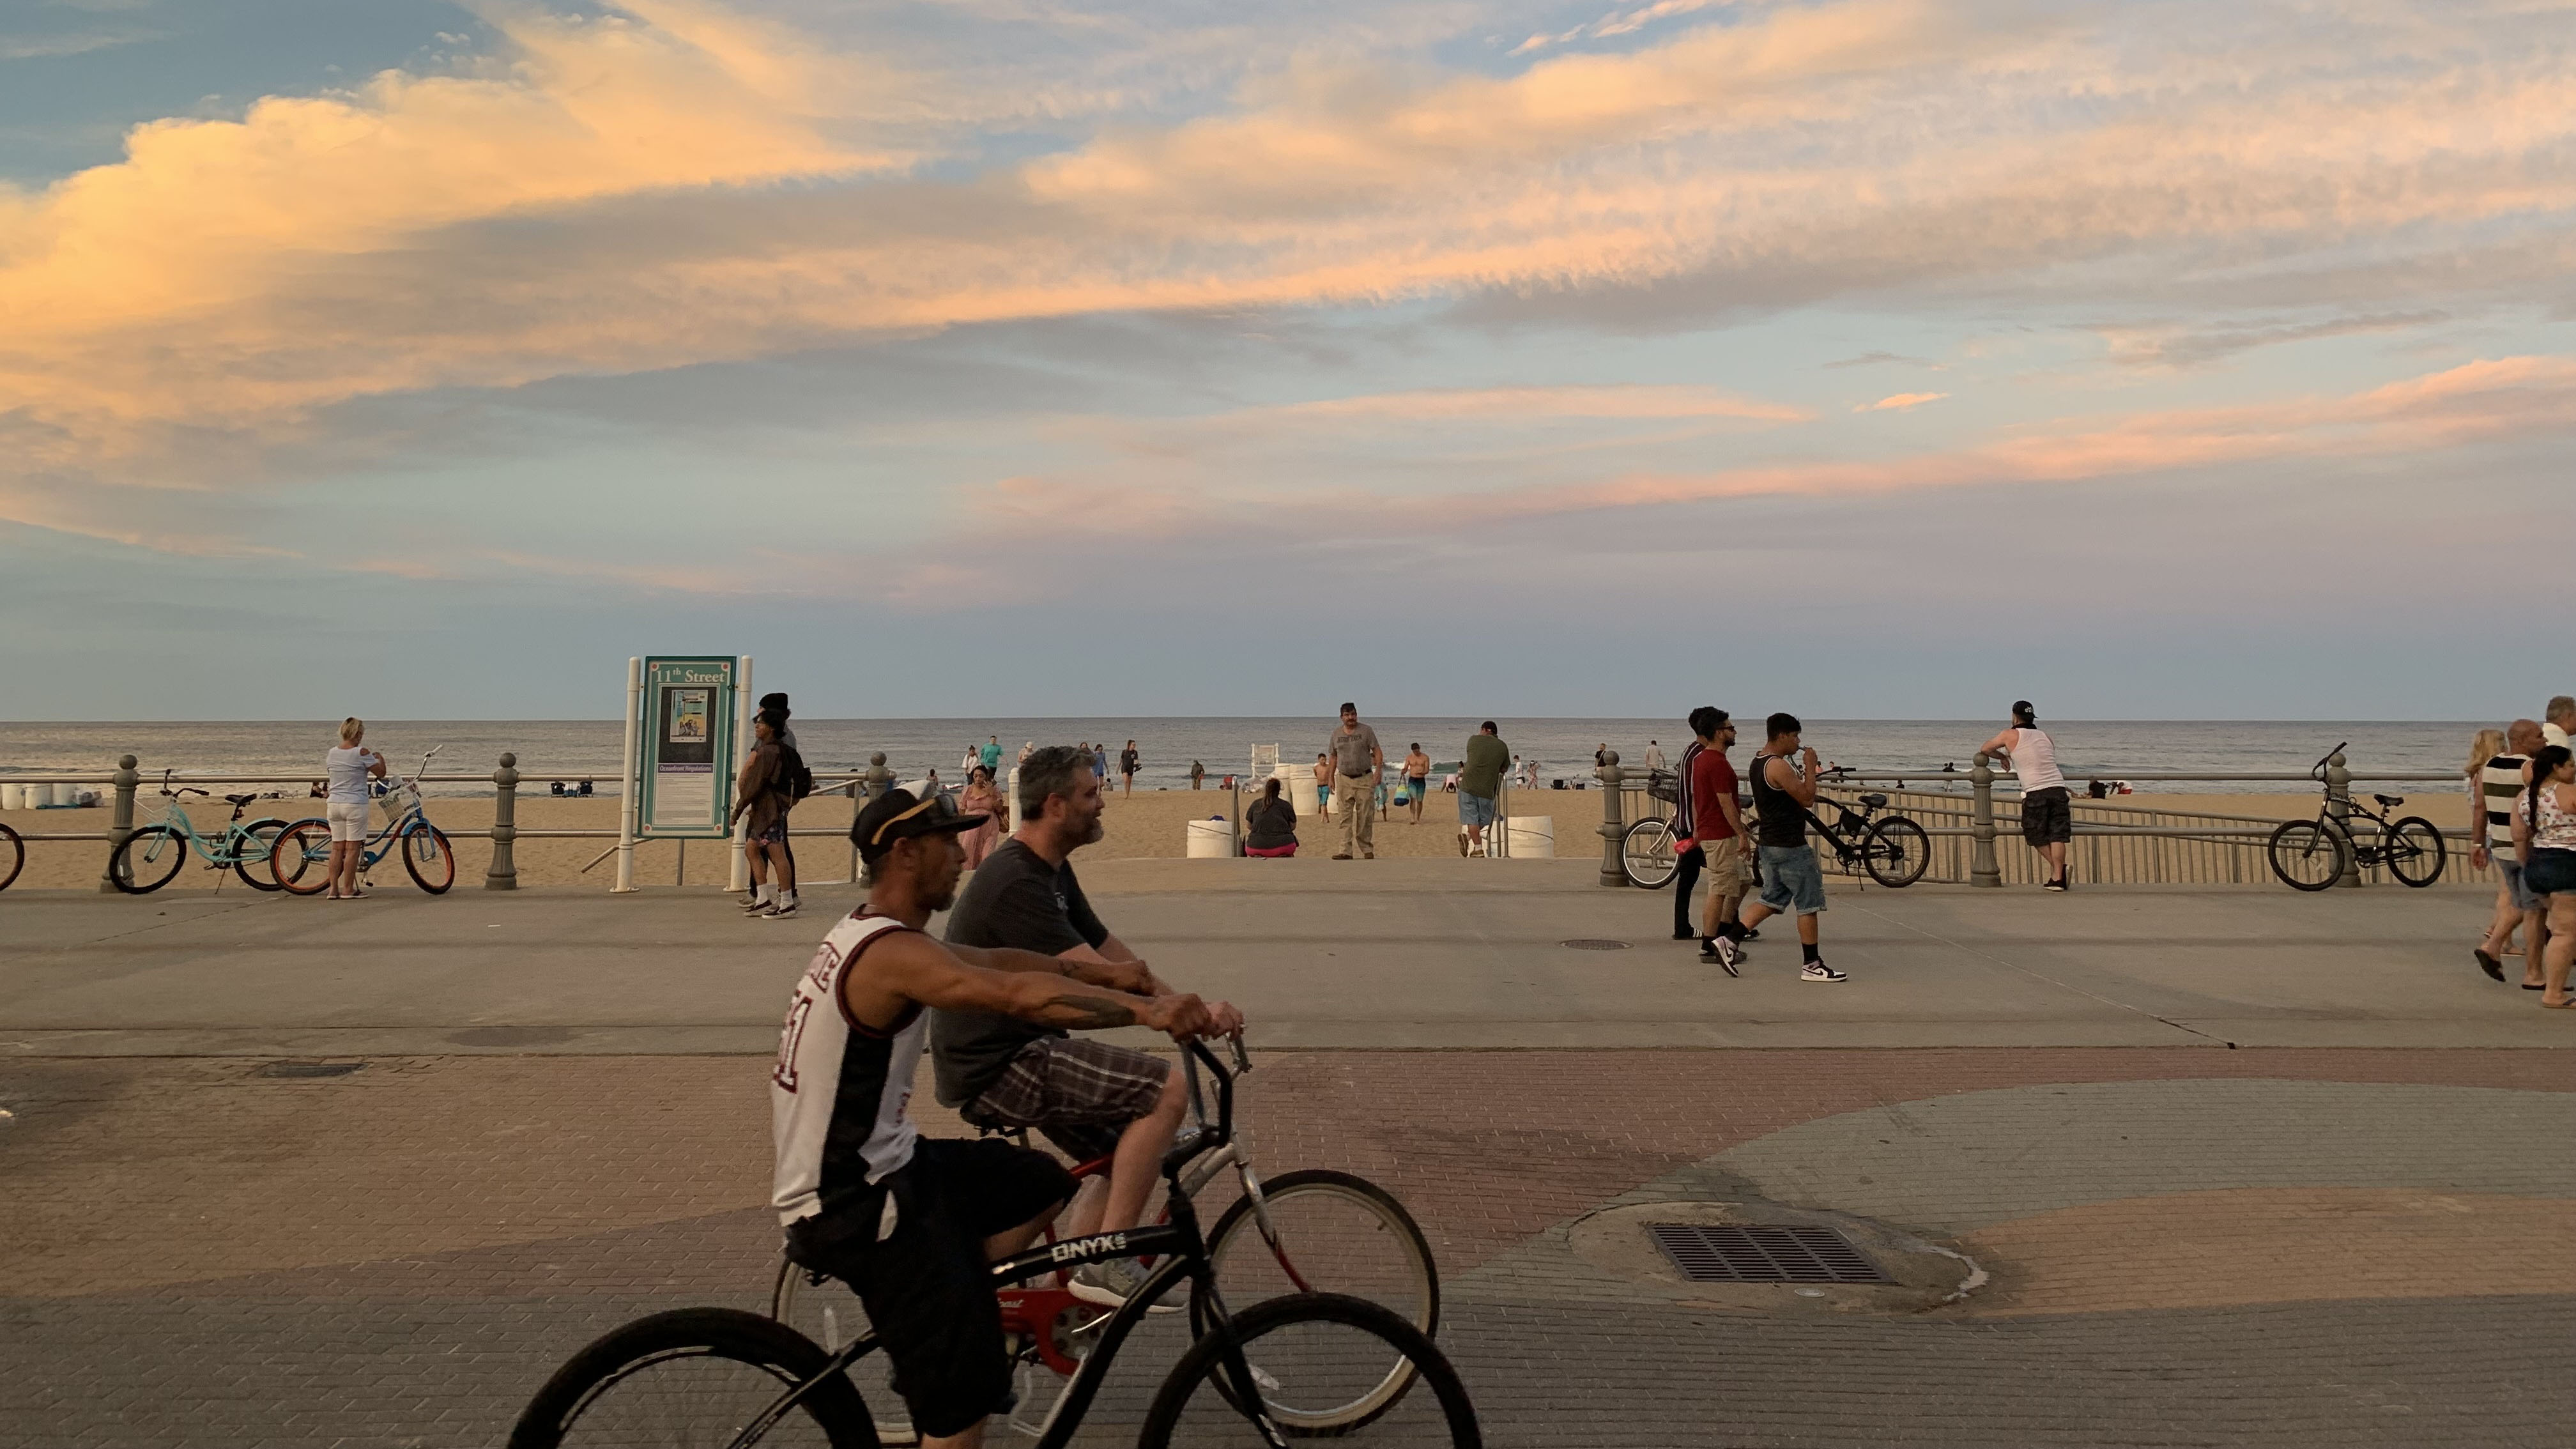 Beachgoers at the Oceanfront in Virginia Beach on a hot evening in July 2022. (Photo by Katherine Hafner)